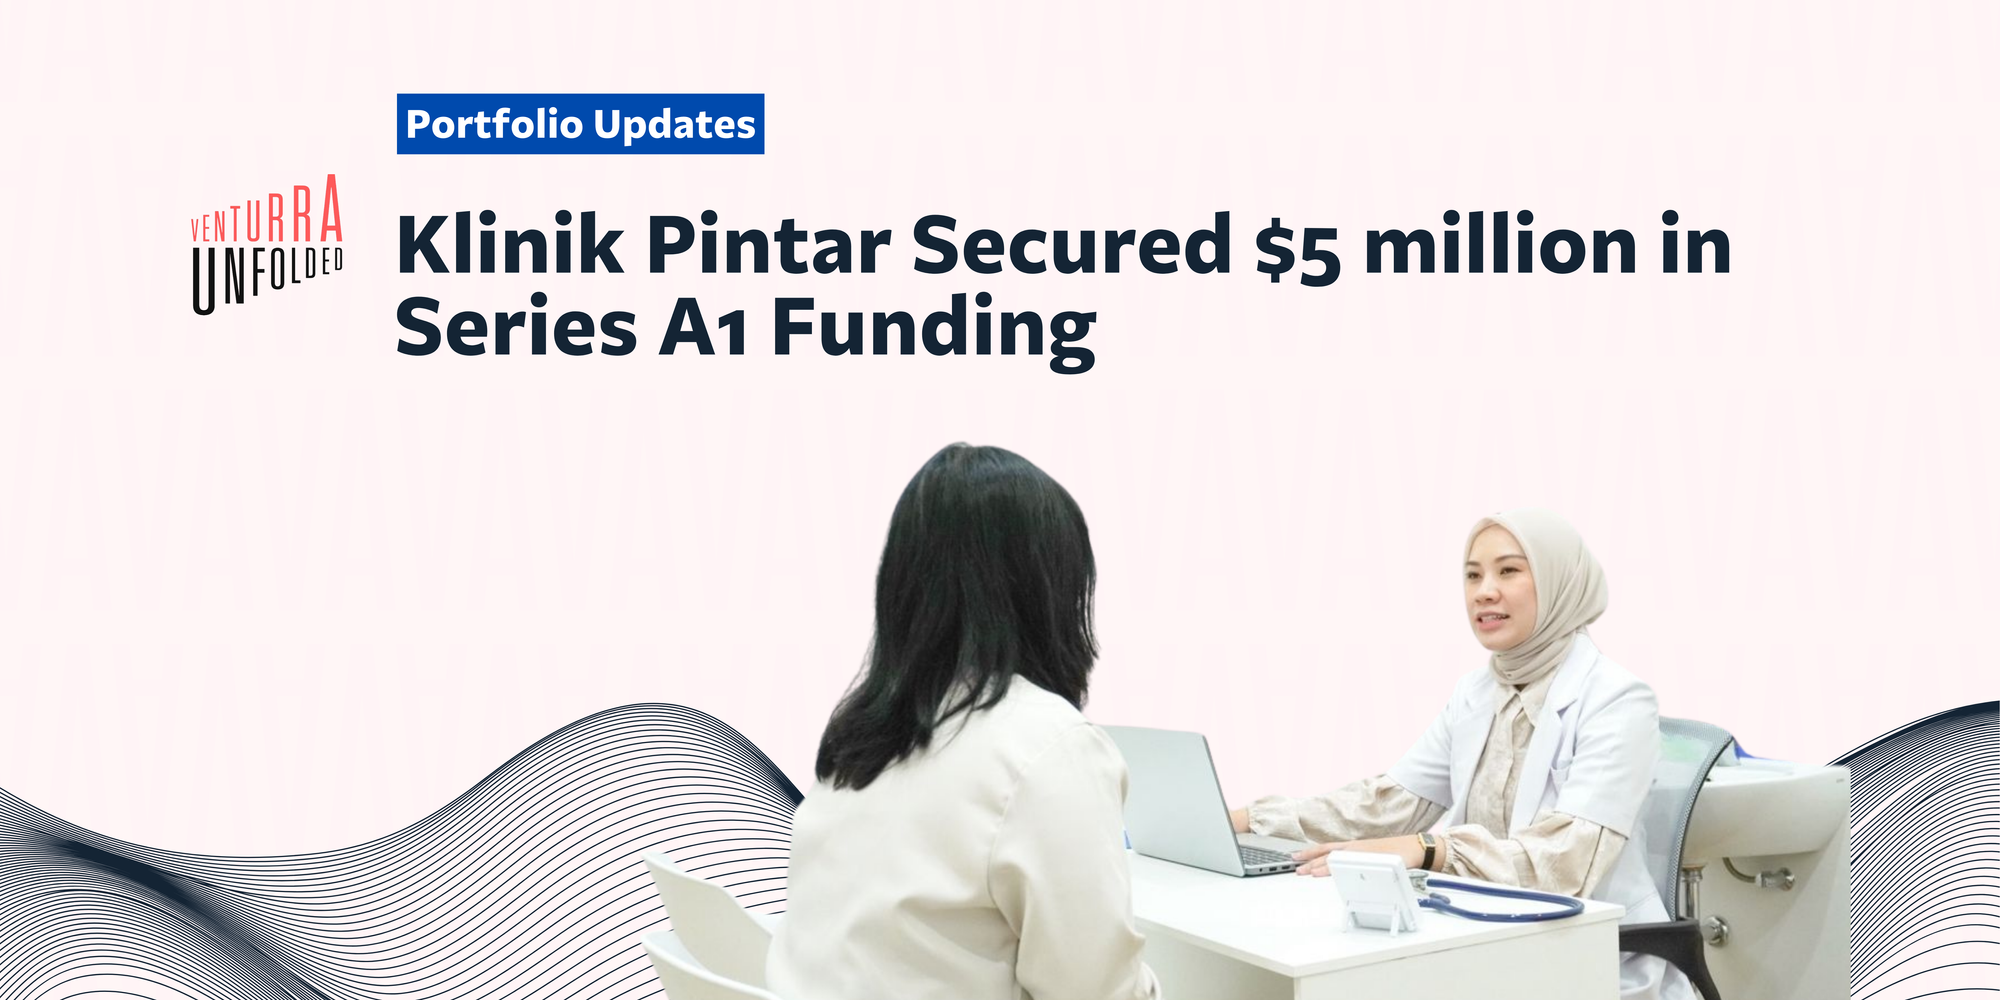 Klinik Pintar Secured $ 5 million in Series A1 Funding to Drive the Expansion of its Healthtech Services